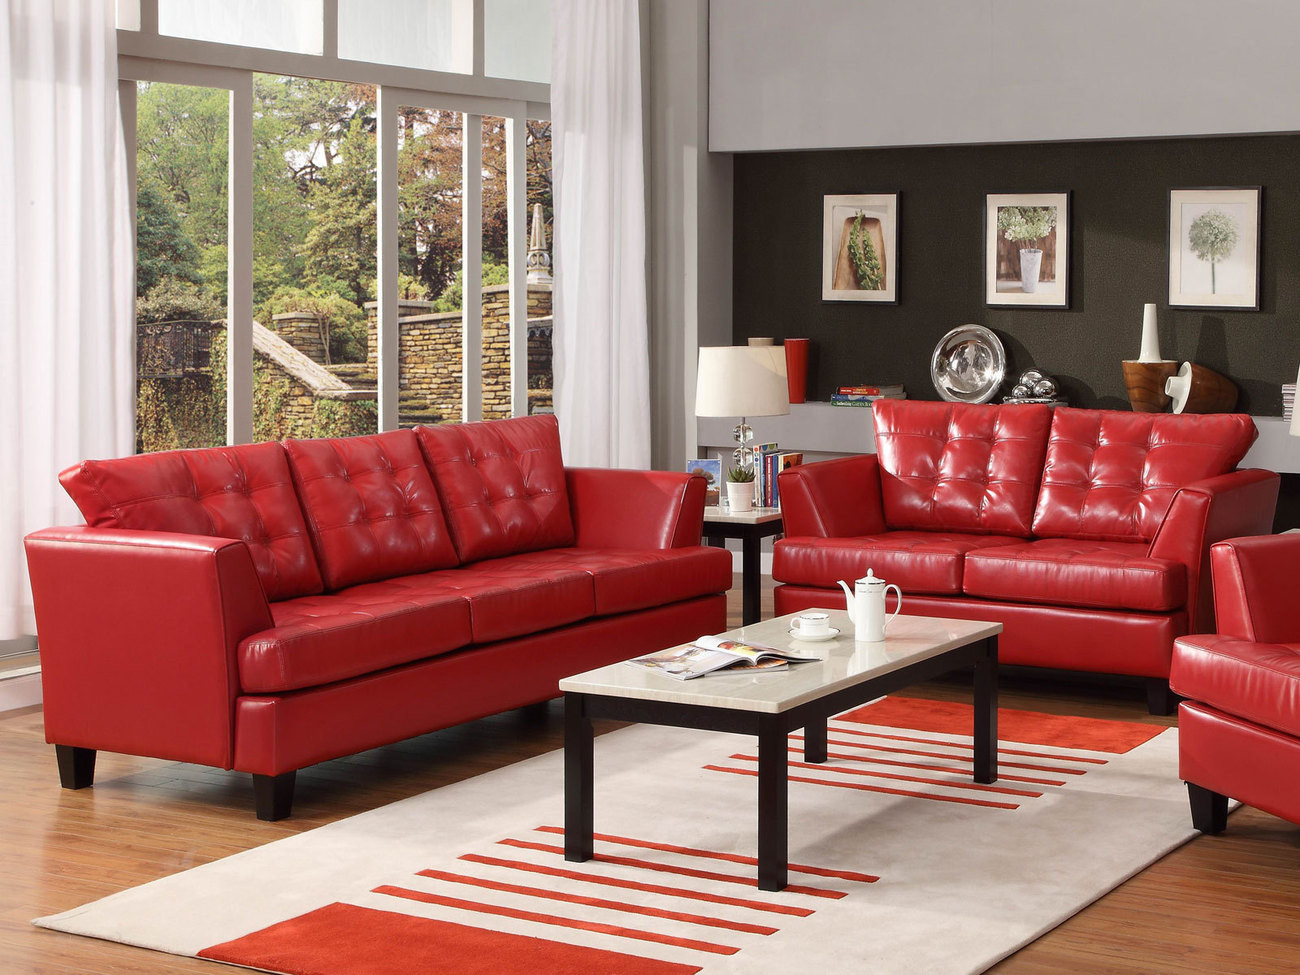 Red Living Room Decoration
 Red Living Room Ideas to Decorate Modern Living Room Sets